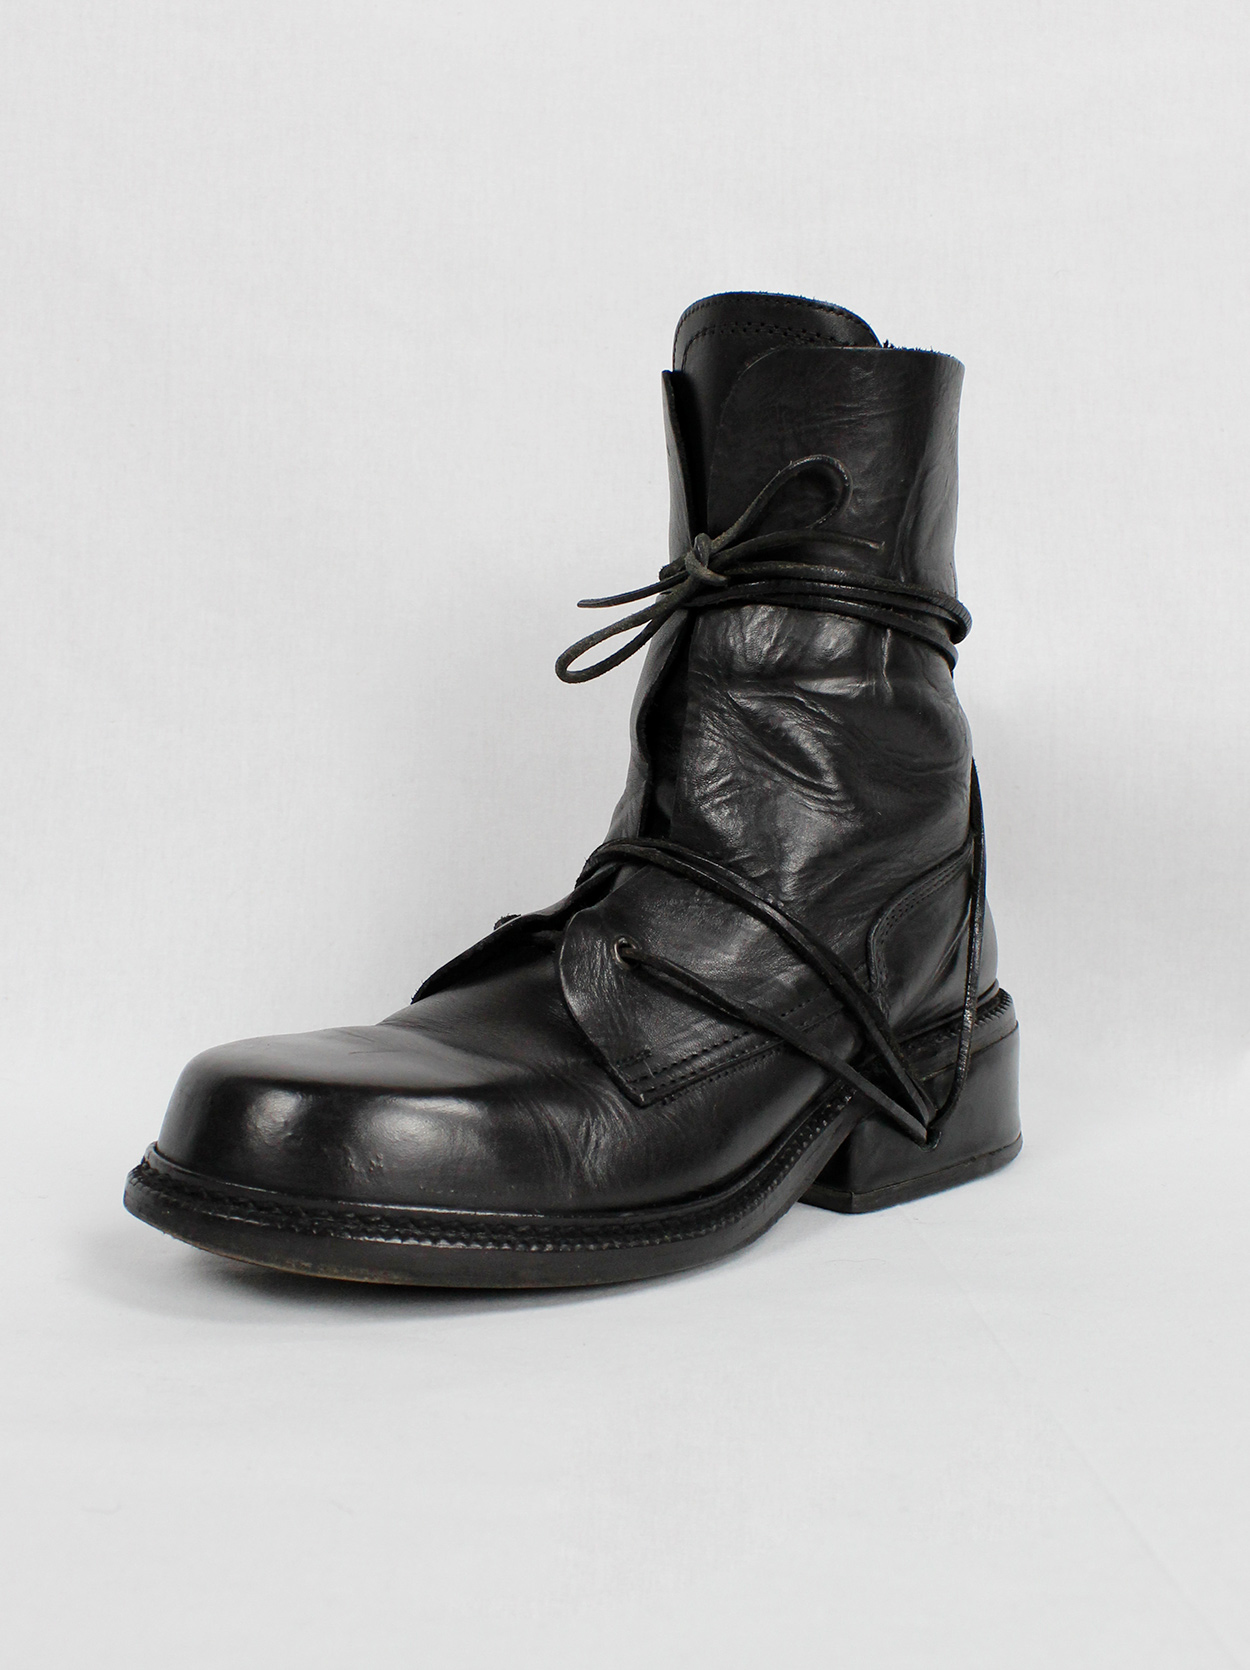 Dirk Bikkembergs black combat boots wrapped with laces through the ...